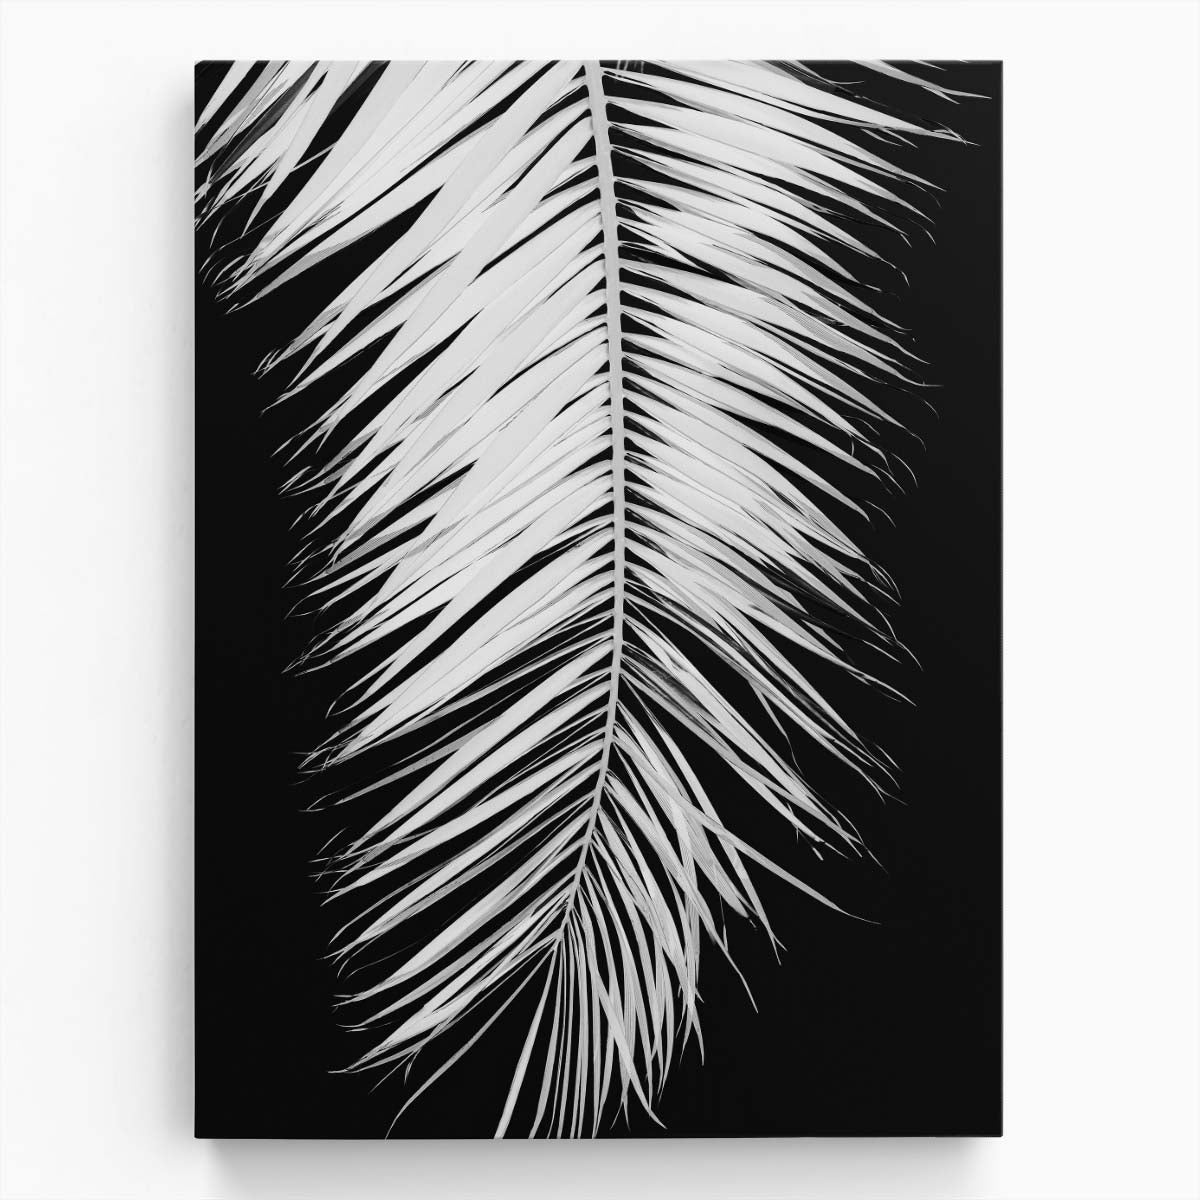 Monochrome Palm Leaf Still Life Photography on Black Background by Luxuriance Designs, made in USA